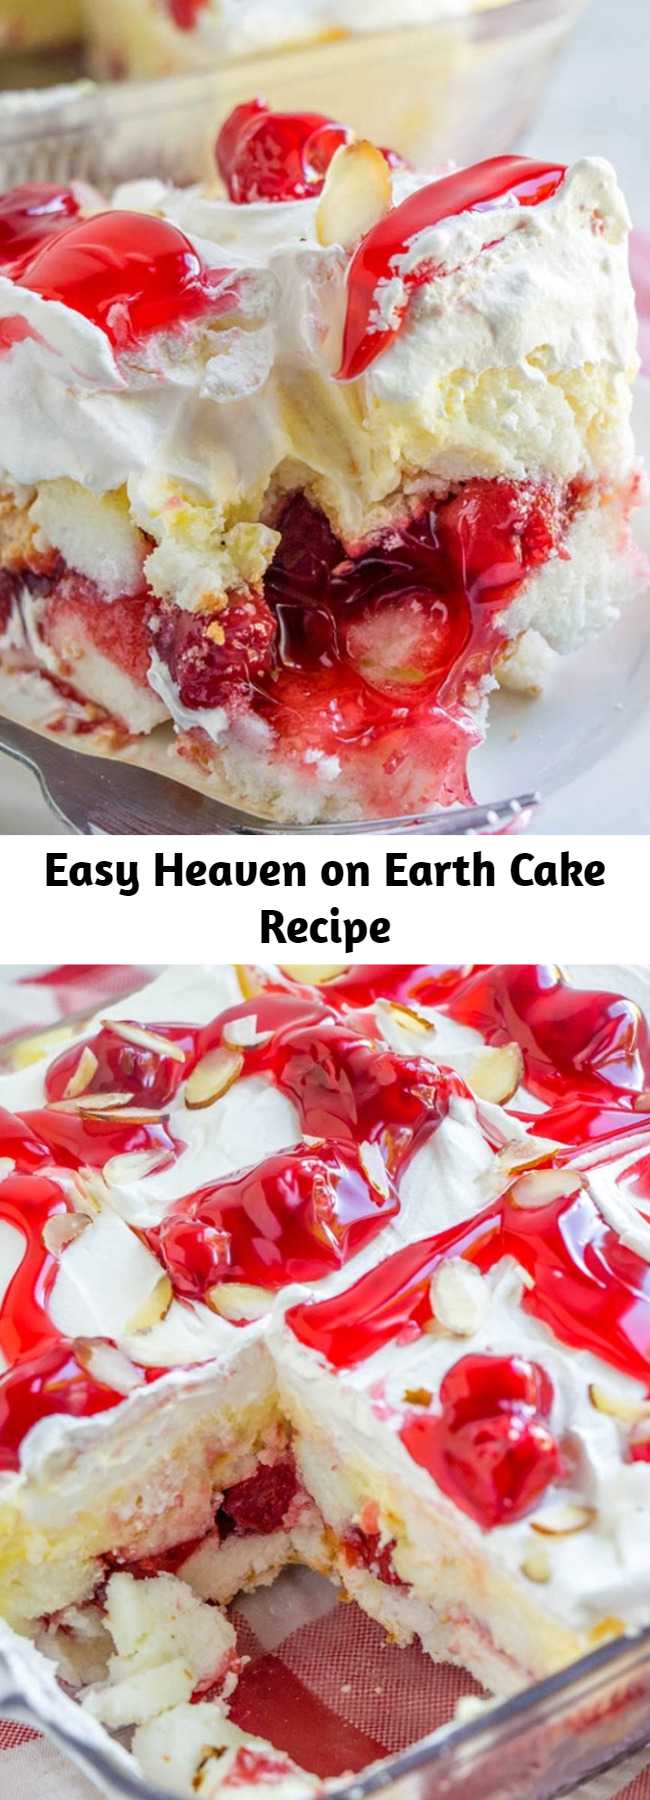 Easy Heaven on Earth Cake Recipe - Heaven on Earth Cake with delicious layers of angel cake, sour cream pudding, cherry pie filling, whipped topping, and almonds. Creamy and decadent, this cherry trifle is a sure crowd pleaser! #dessert #nobake #iceboxcake #triflecake #refrigeratorcake #cherries #easyrecipe #sweets